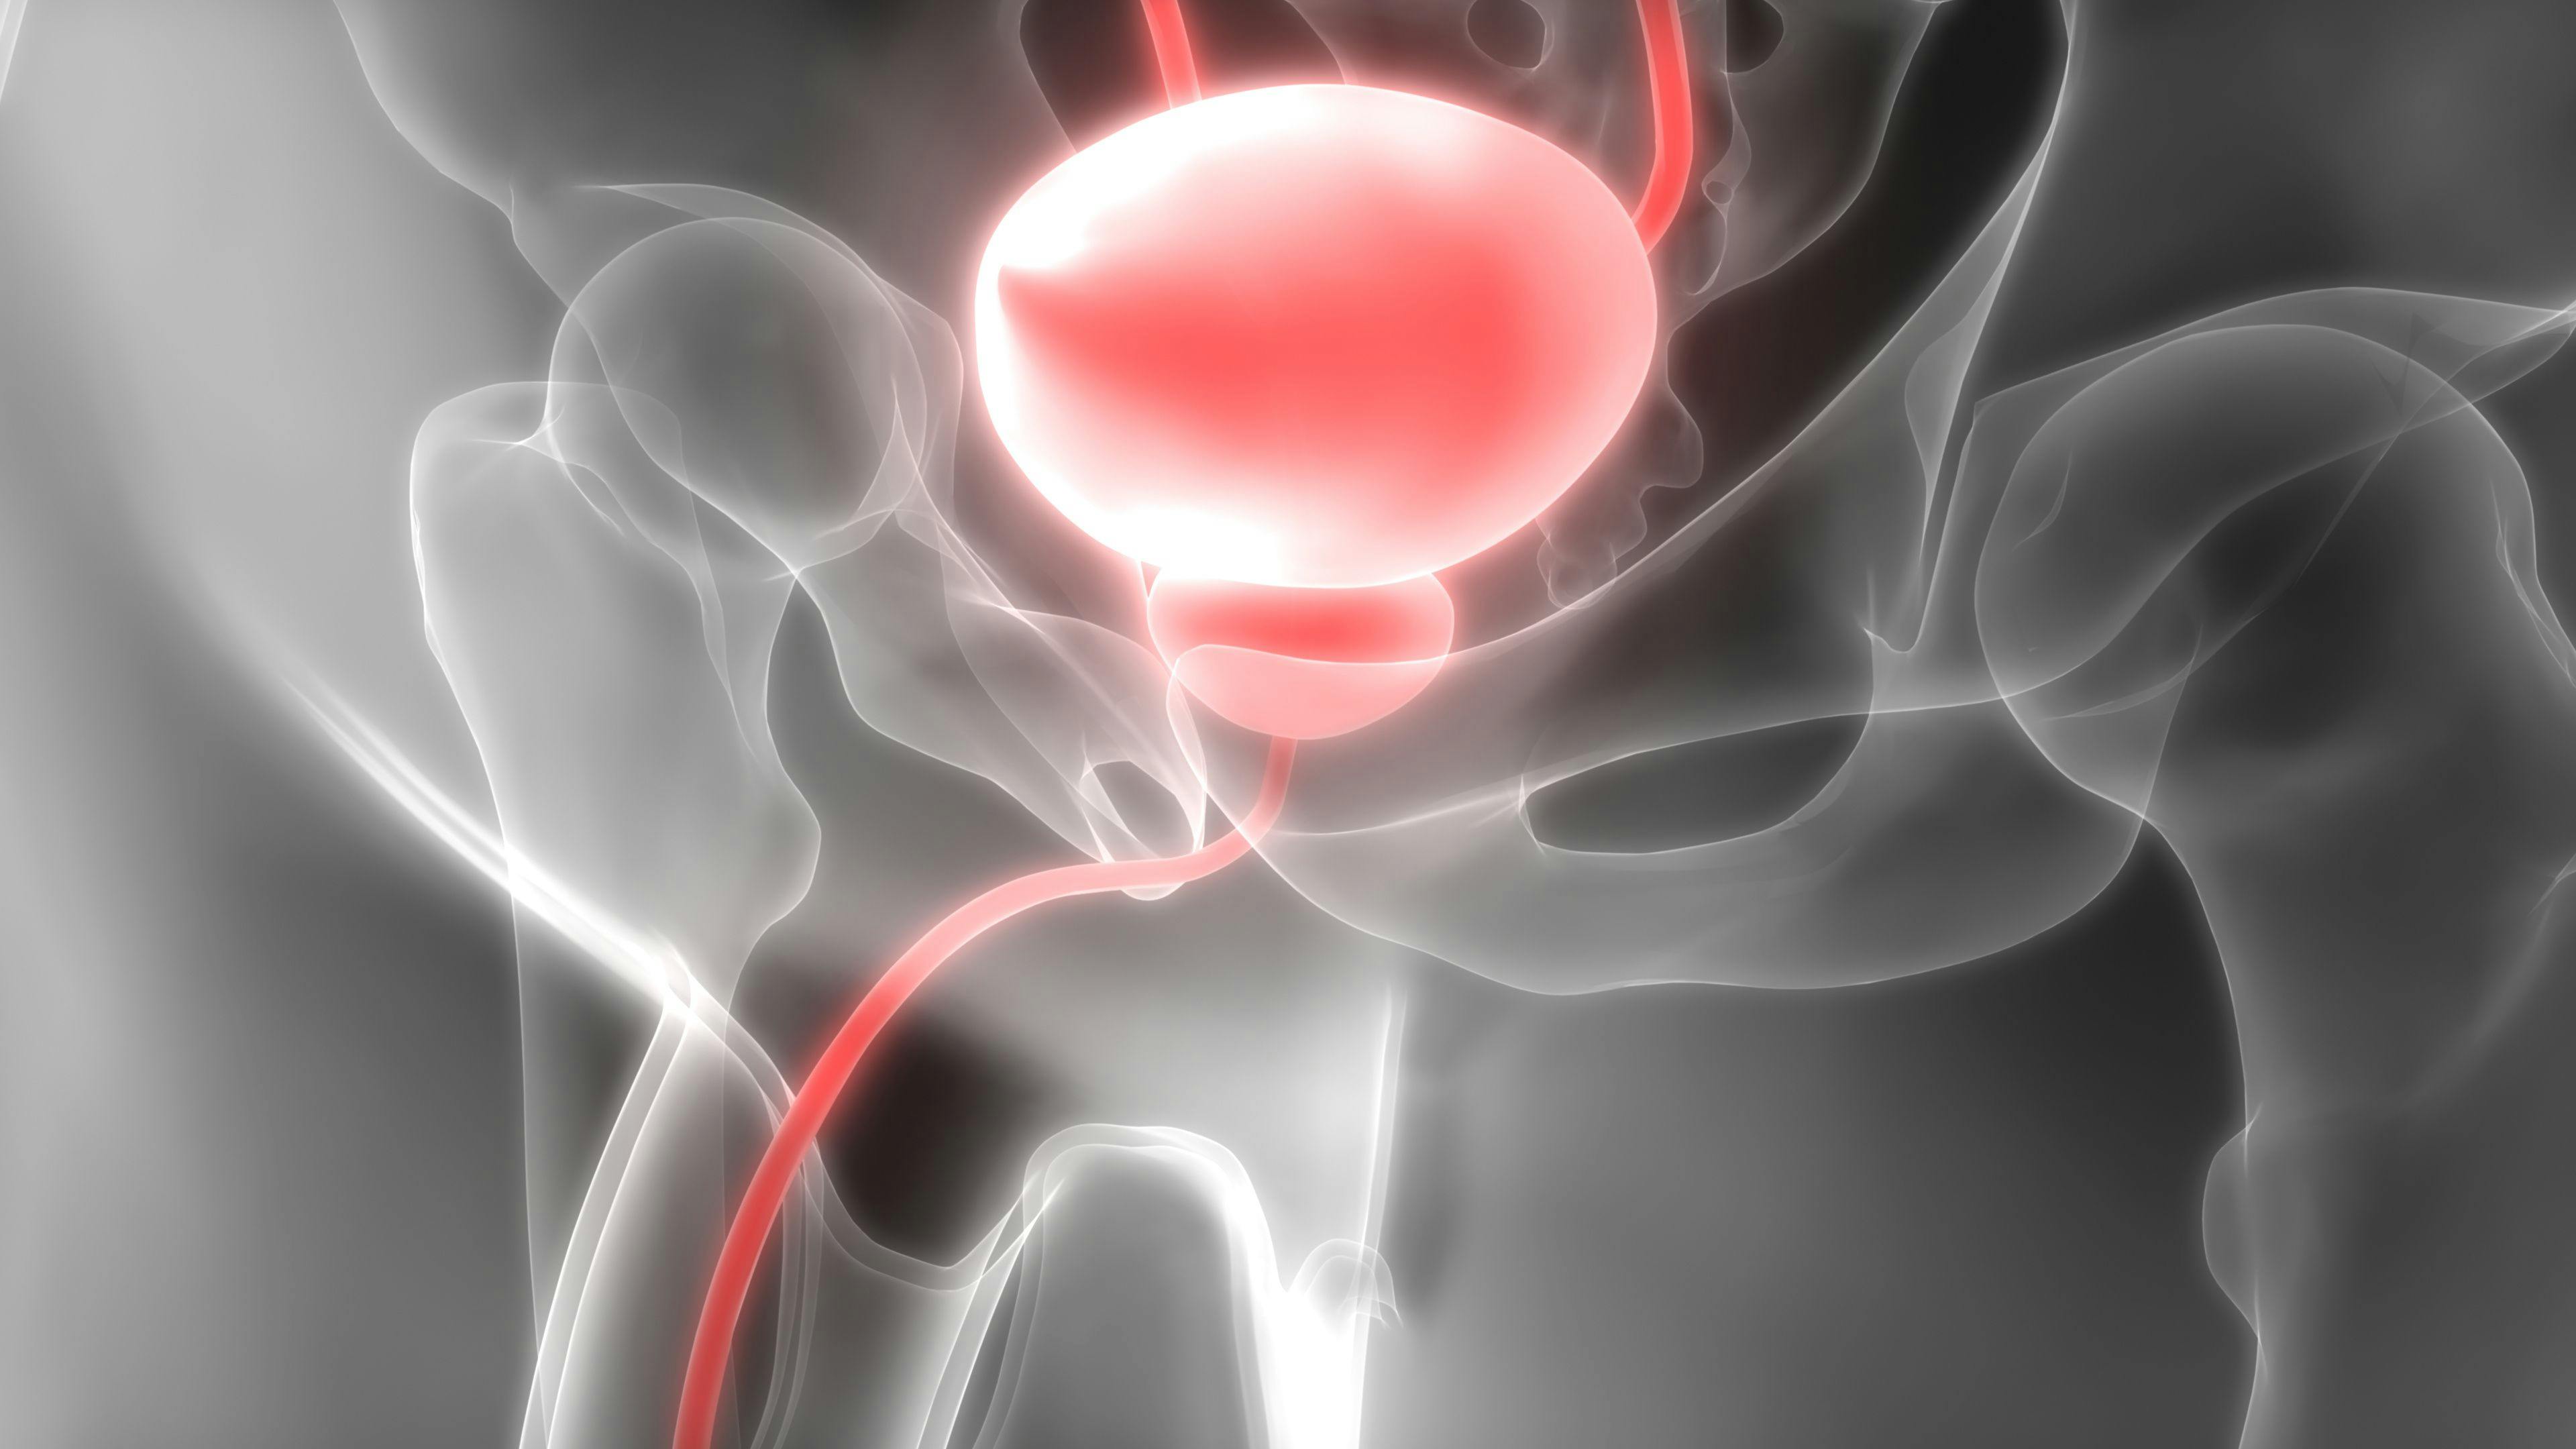 Patients with metastatic castration-resistant prostate cancer with or without homologous recombination repair gene mutations may derive benefit from olaparib and abiraterone acetate, according data from the phase 3 PROpel trial.